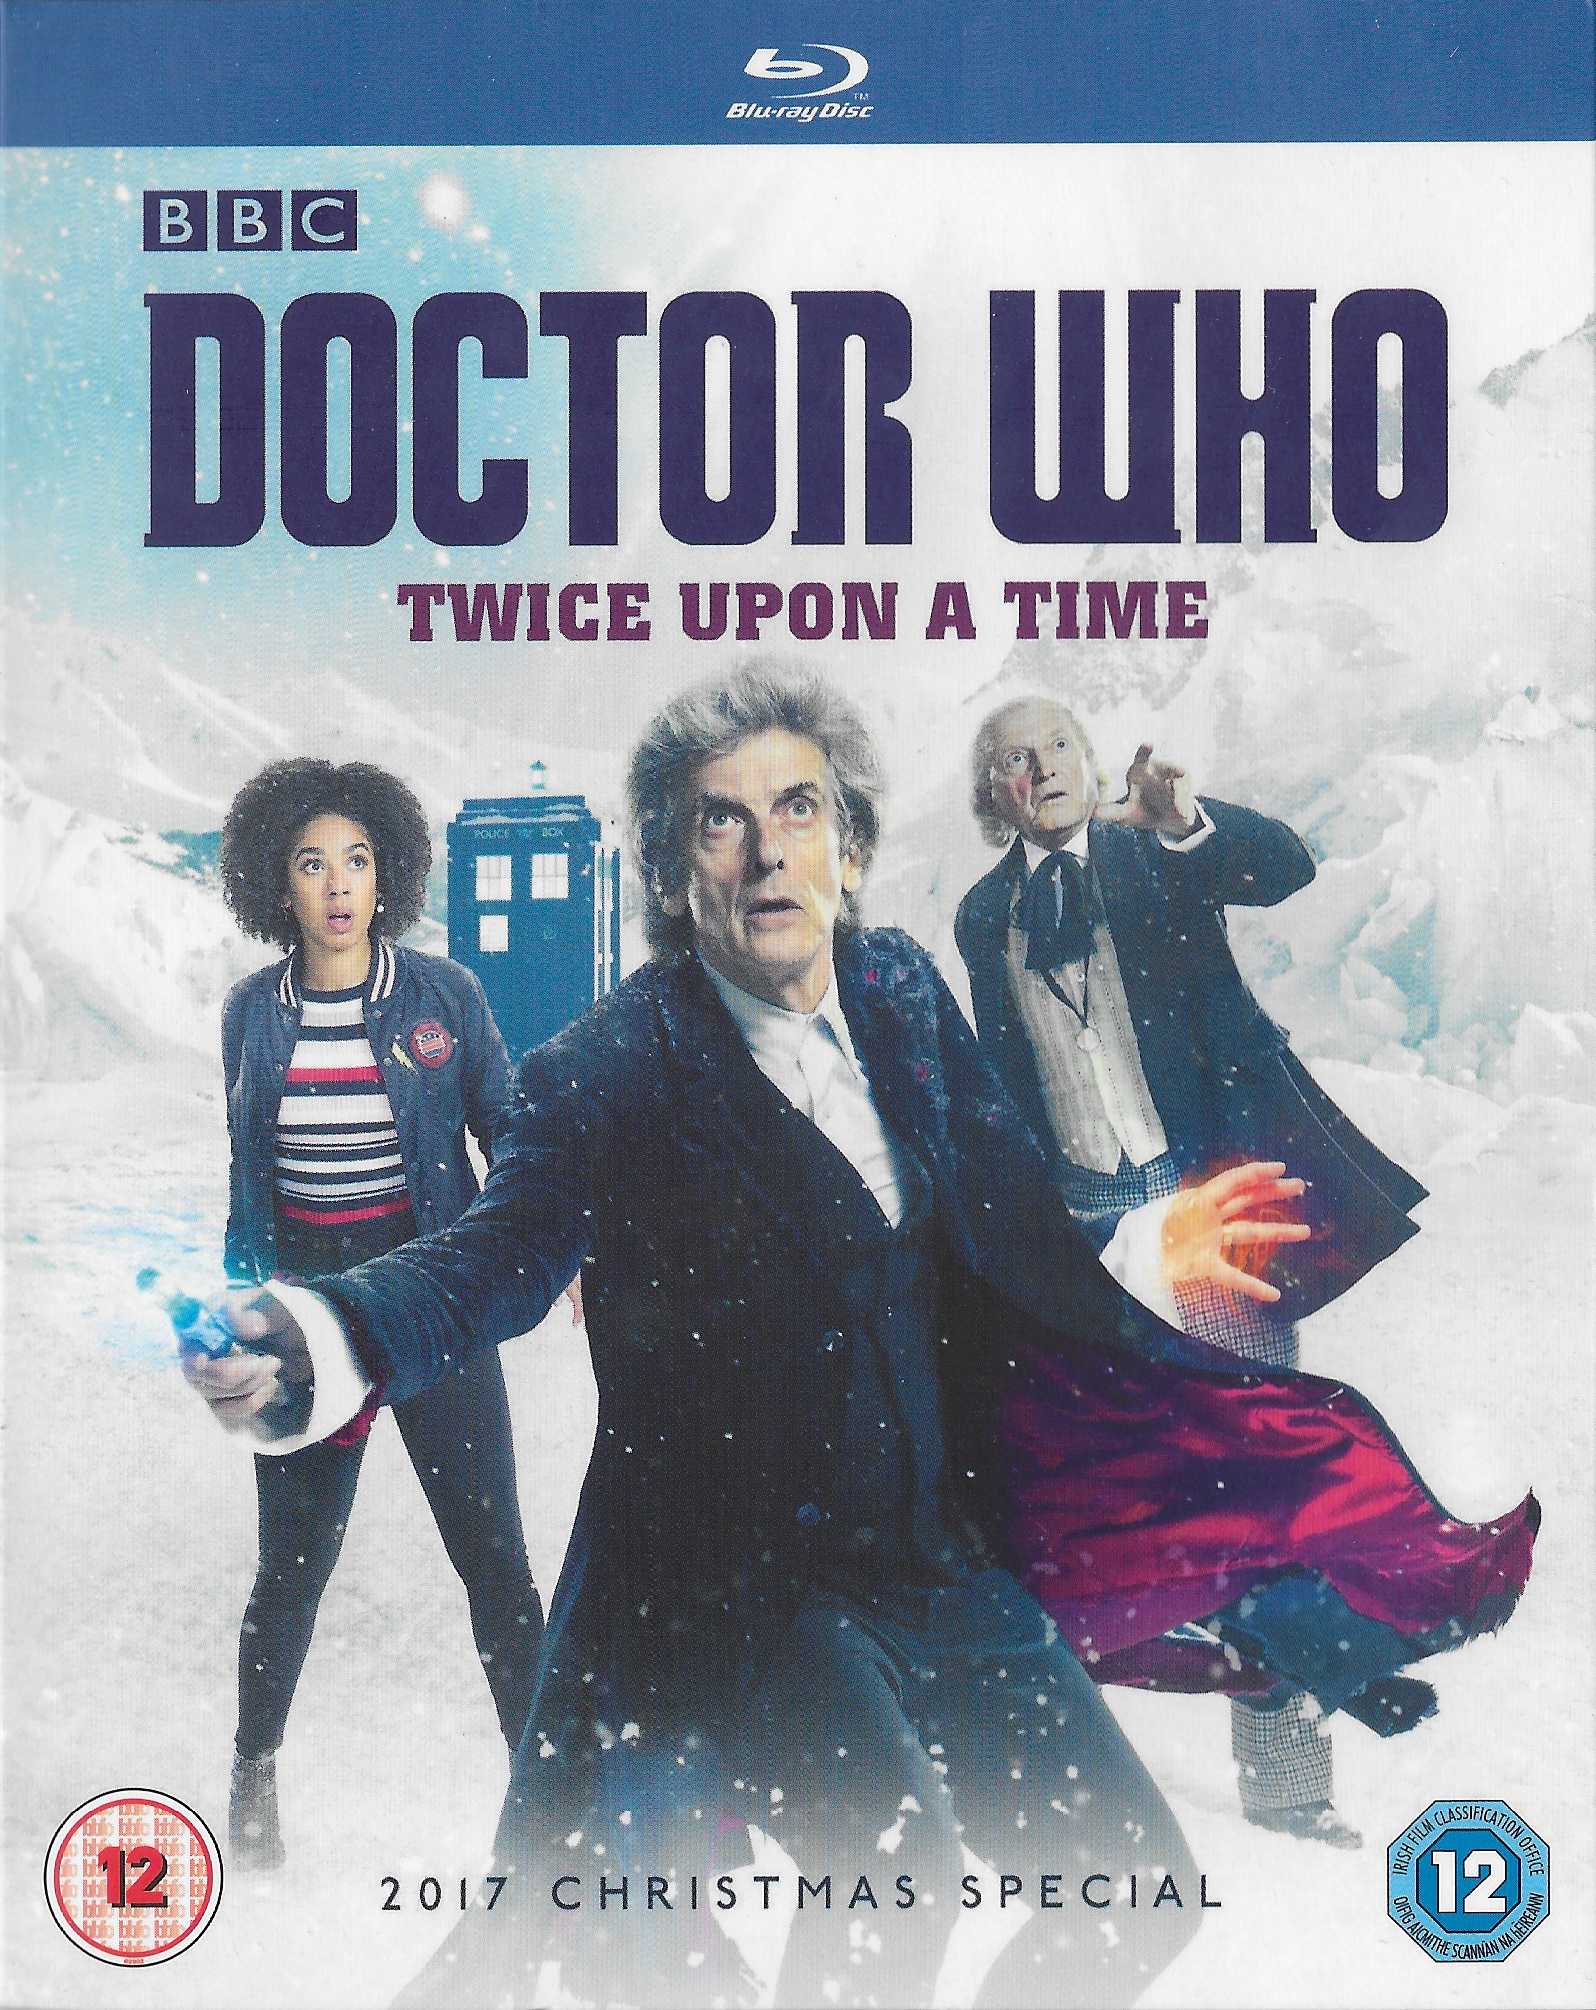 Picture of BBCBD 0423 Doctor Who - Twice upon a time by artist Steven Moffat from the BBC blu-rays - Records and Tapes library